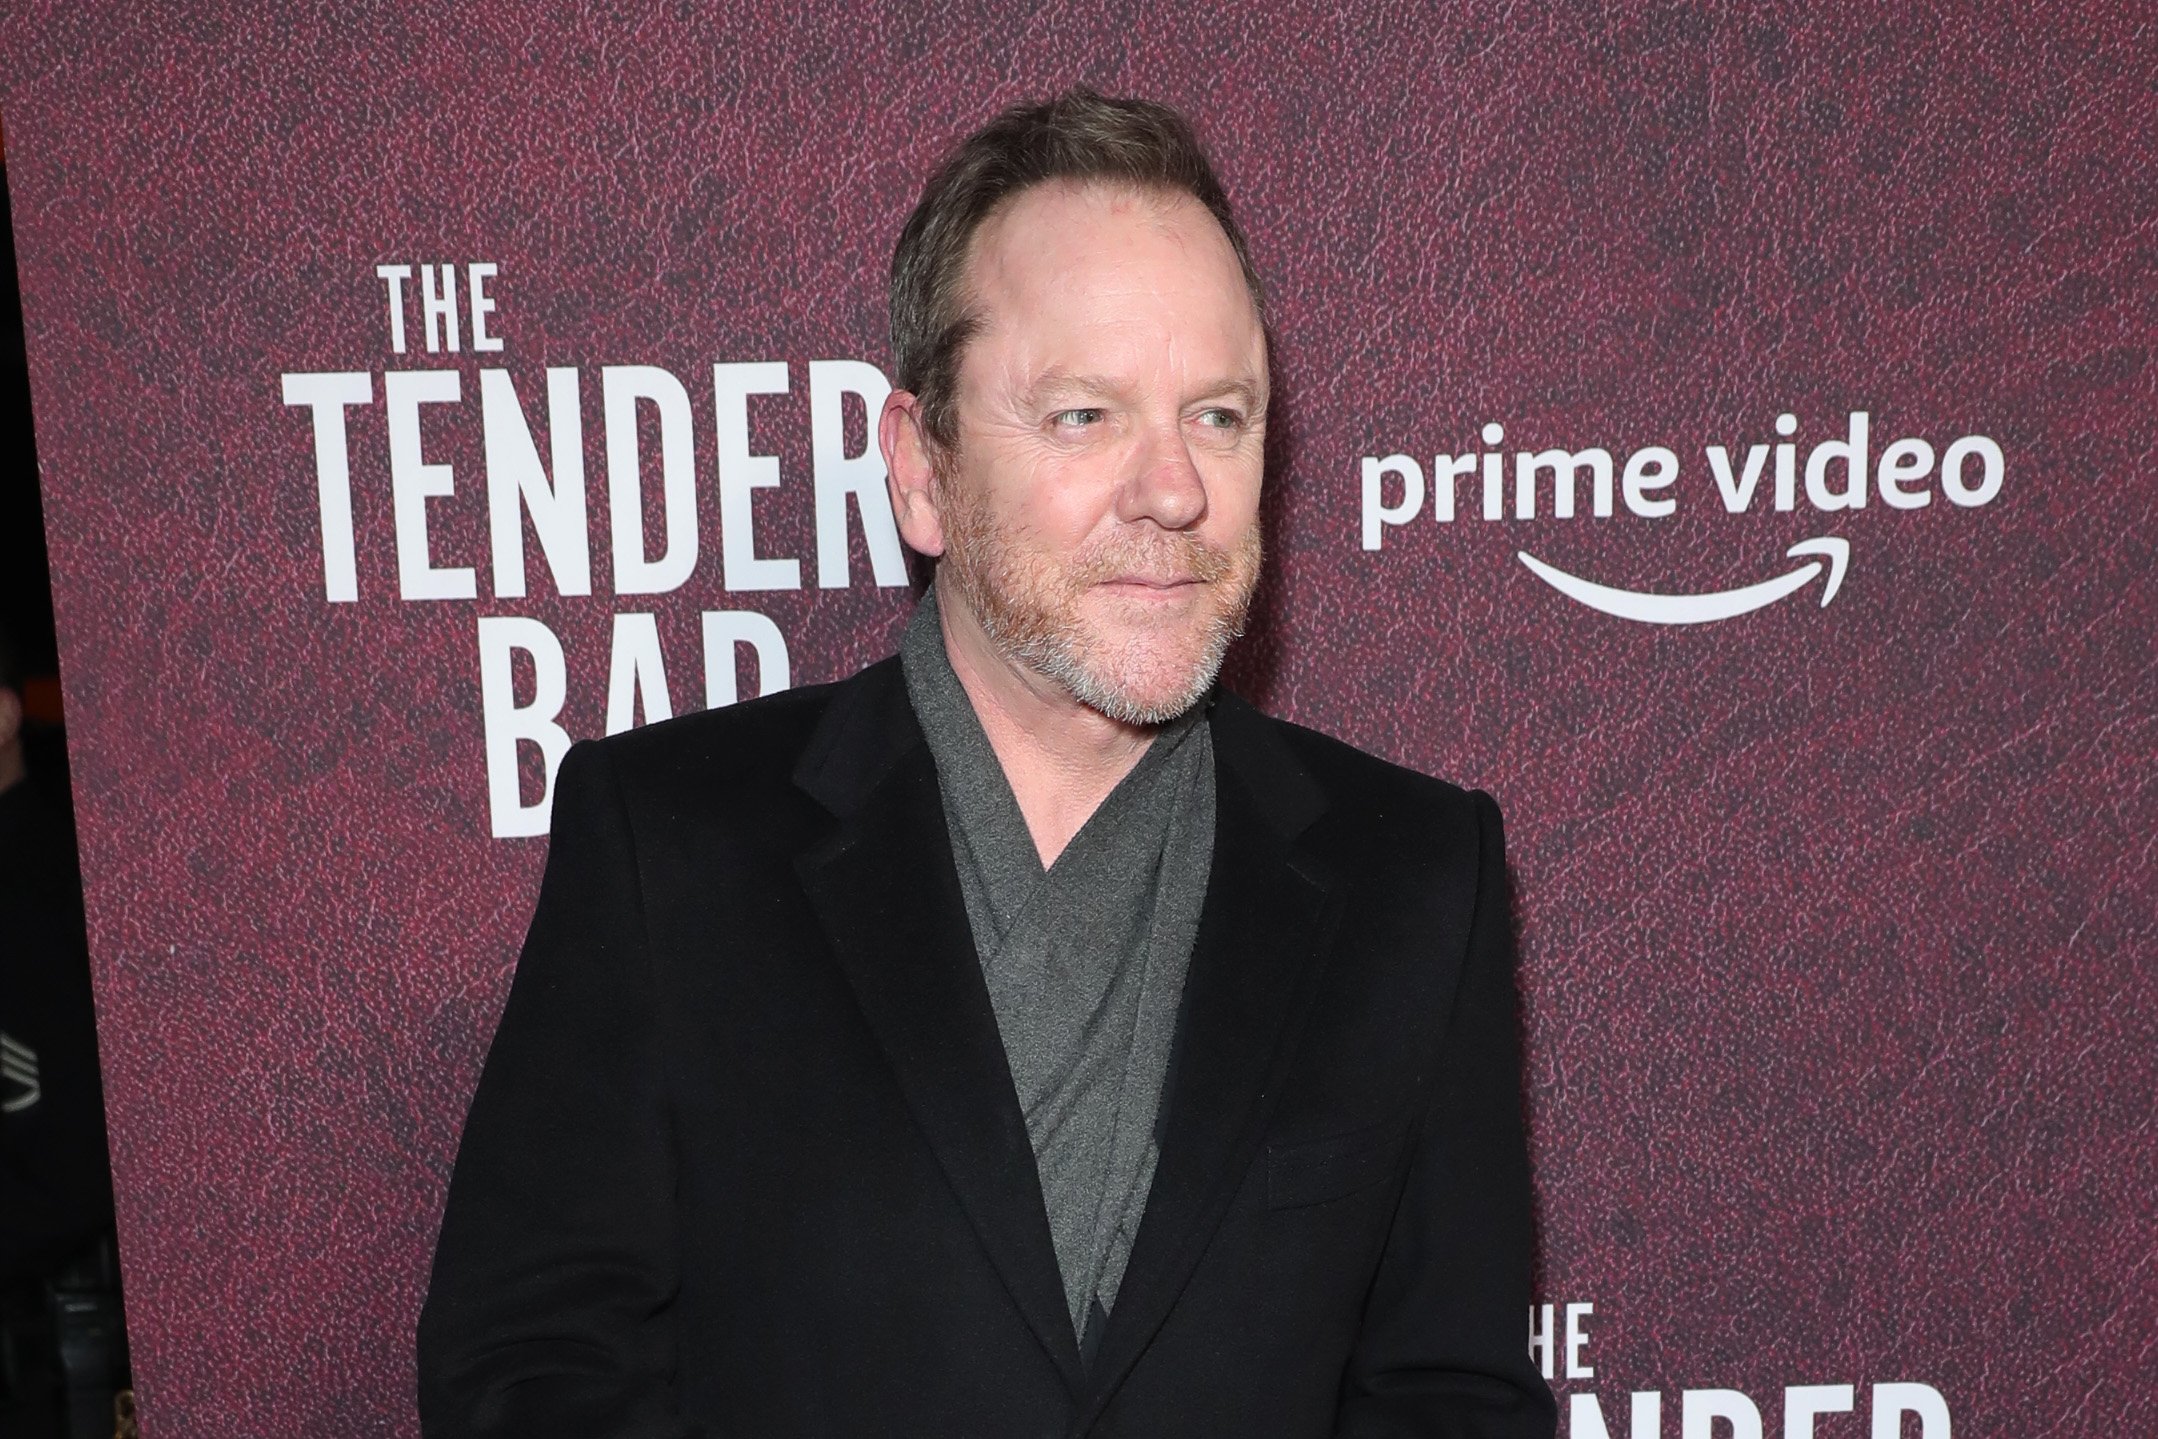 Kiefer Sutherland attends Los Angeles Premiere of Amazon Studio's "The Tender Bar" at TCL Chinese Theatre on December 12, 2021 in Hollywood, California  | Source: Getty Images